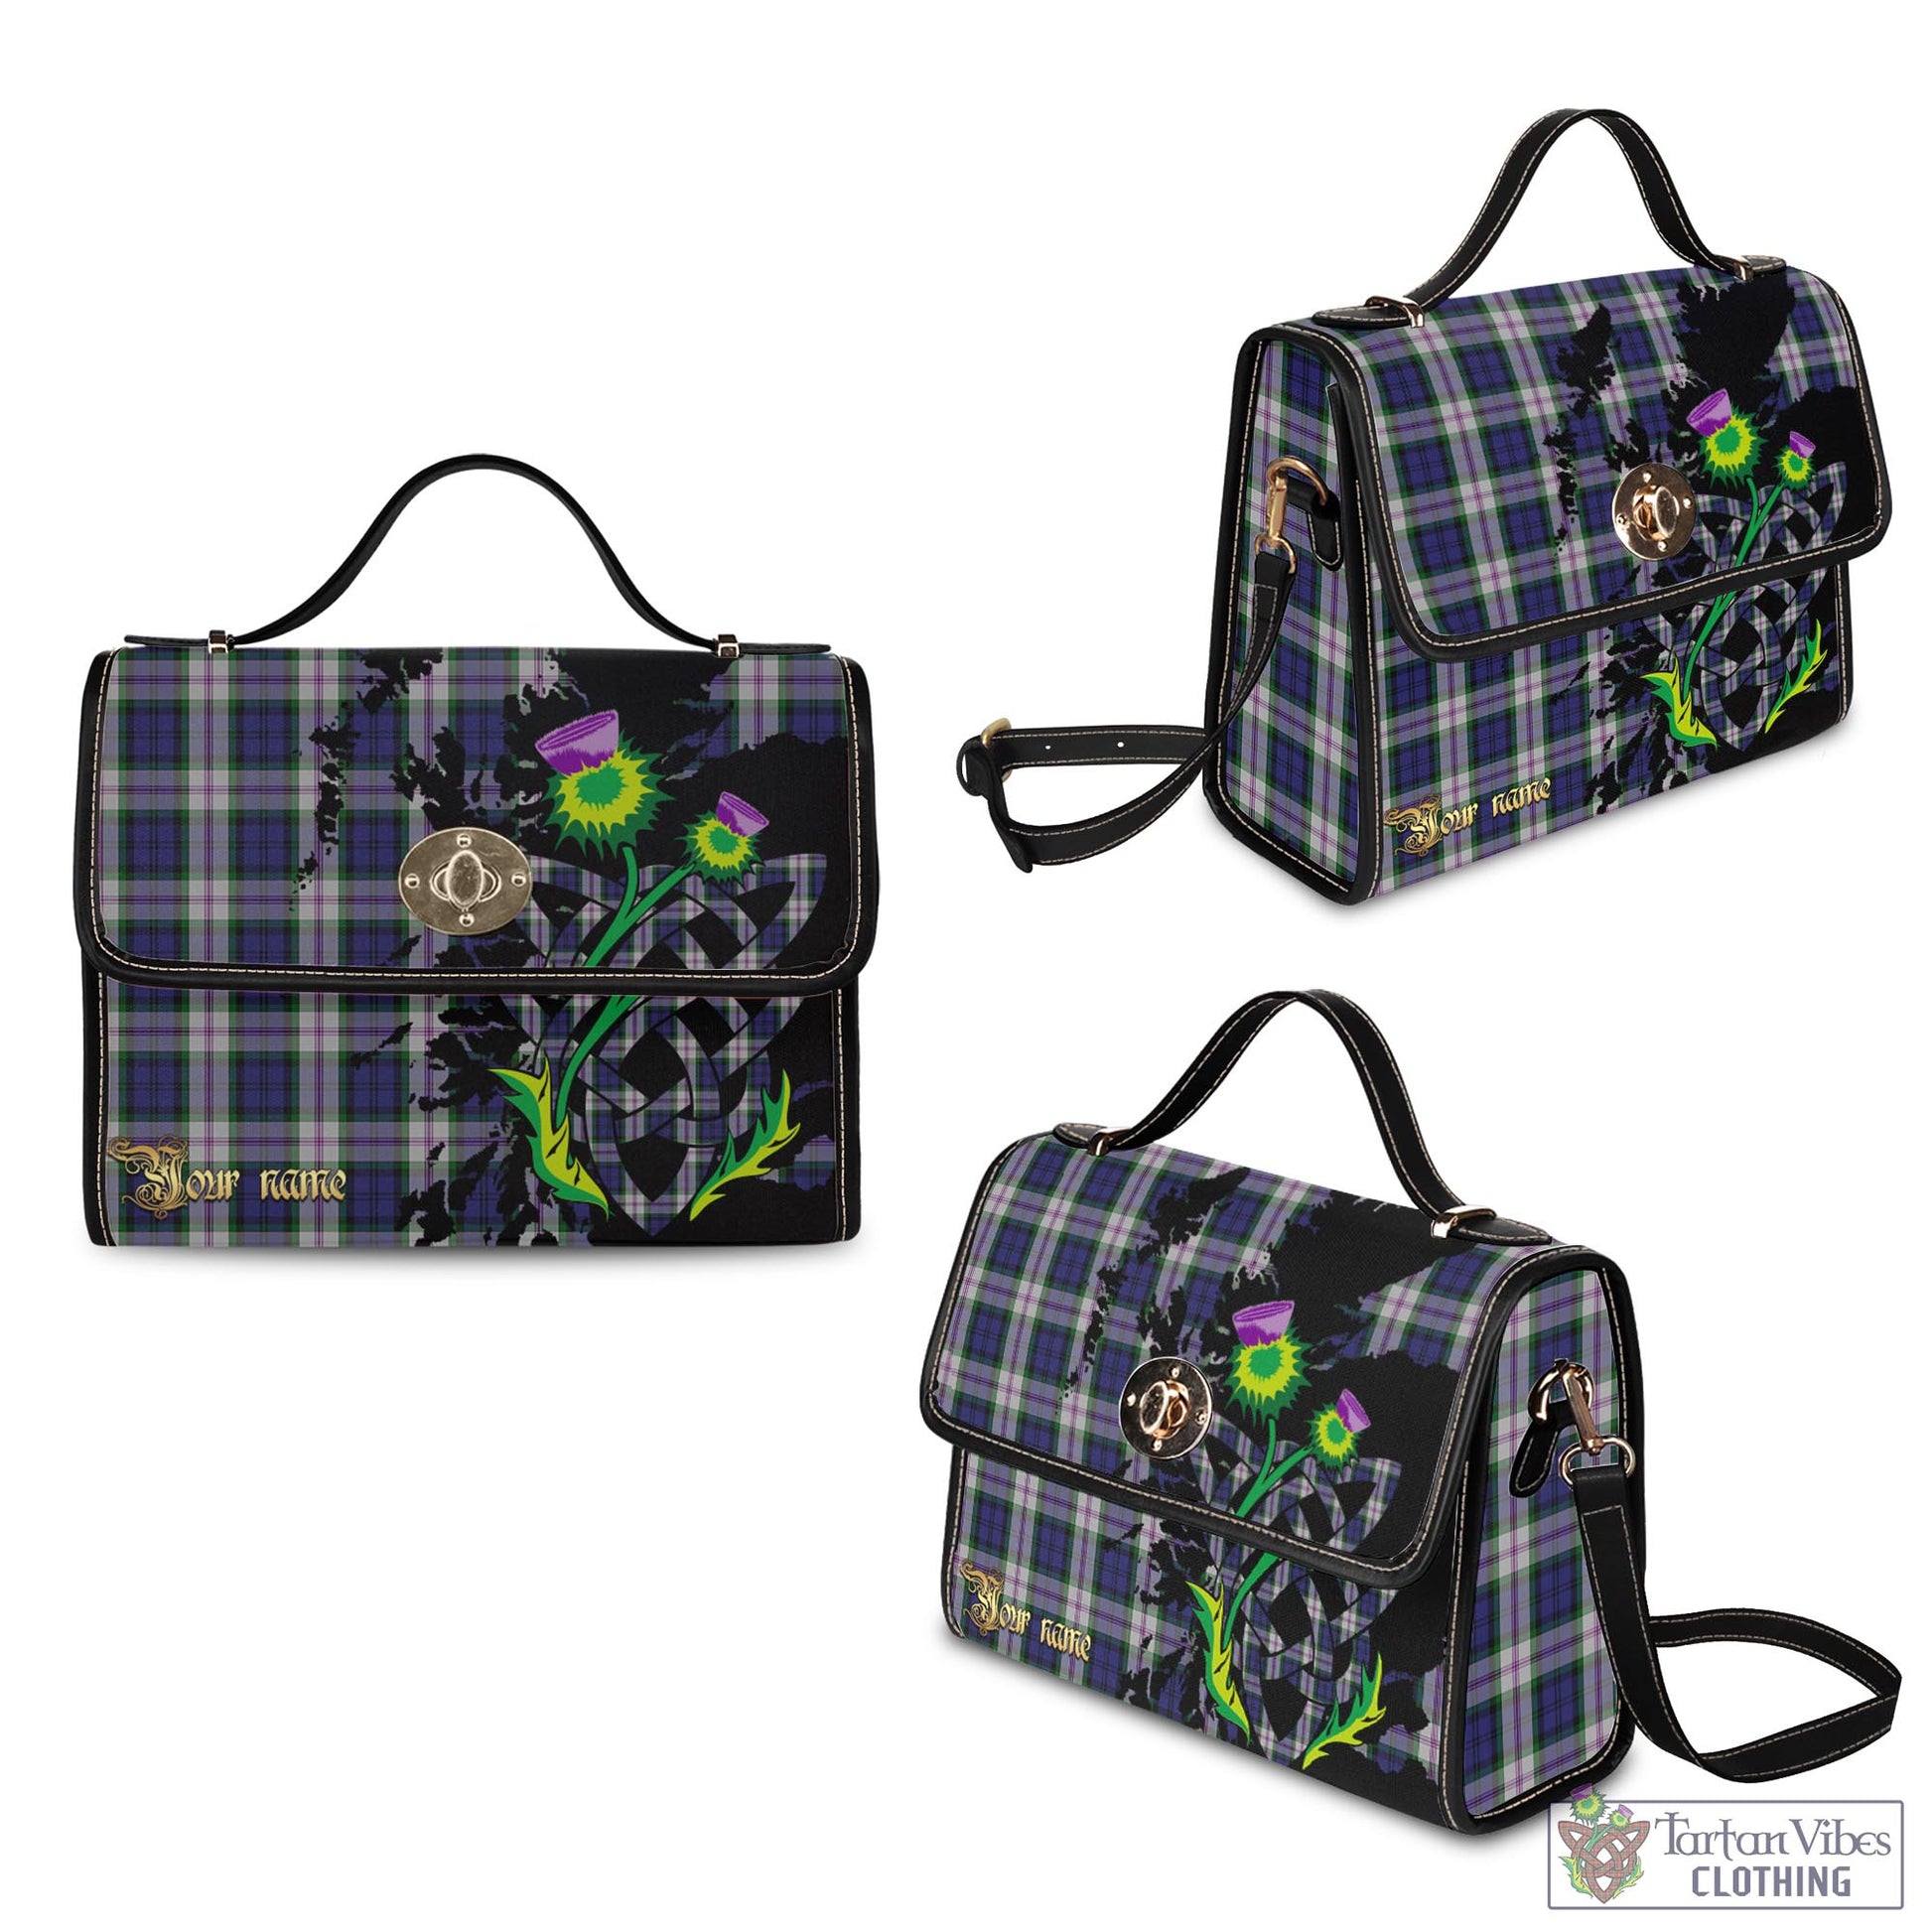 Tartan Vibes Clothing Baird Dress Tartan Waterproof Canvas Bag with Scotland Map and Thistle Celtic Accents